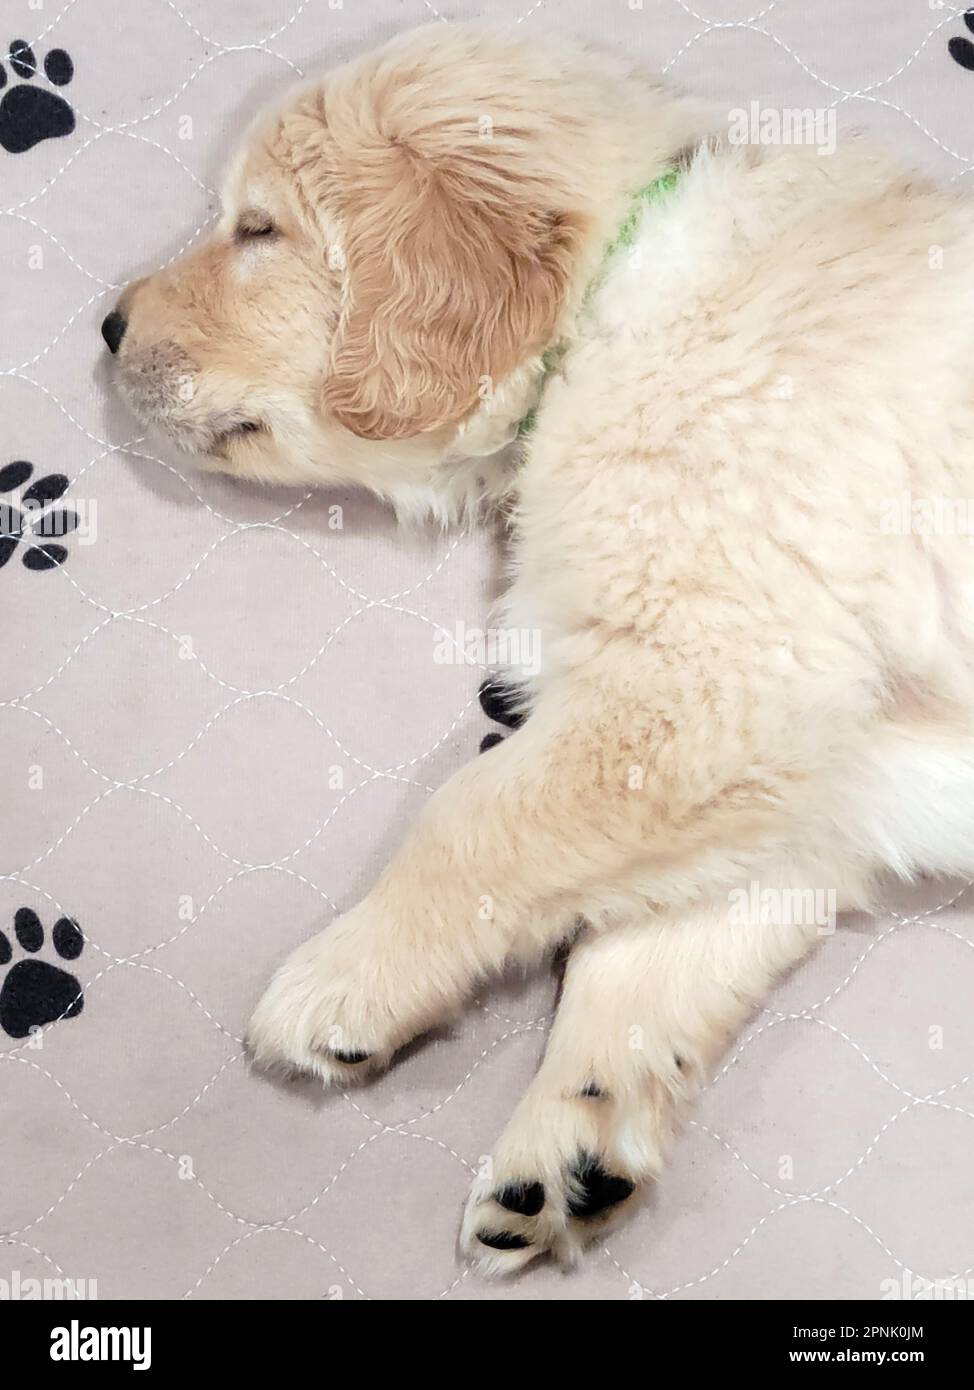 Close-up of a Golden retriever puppy sleeping on a quilted blanket with dog paw prints Stock Photo